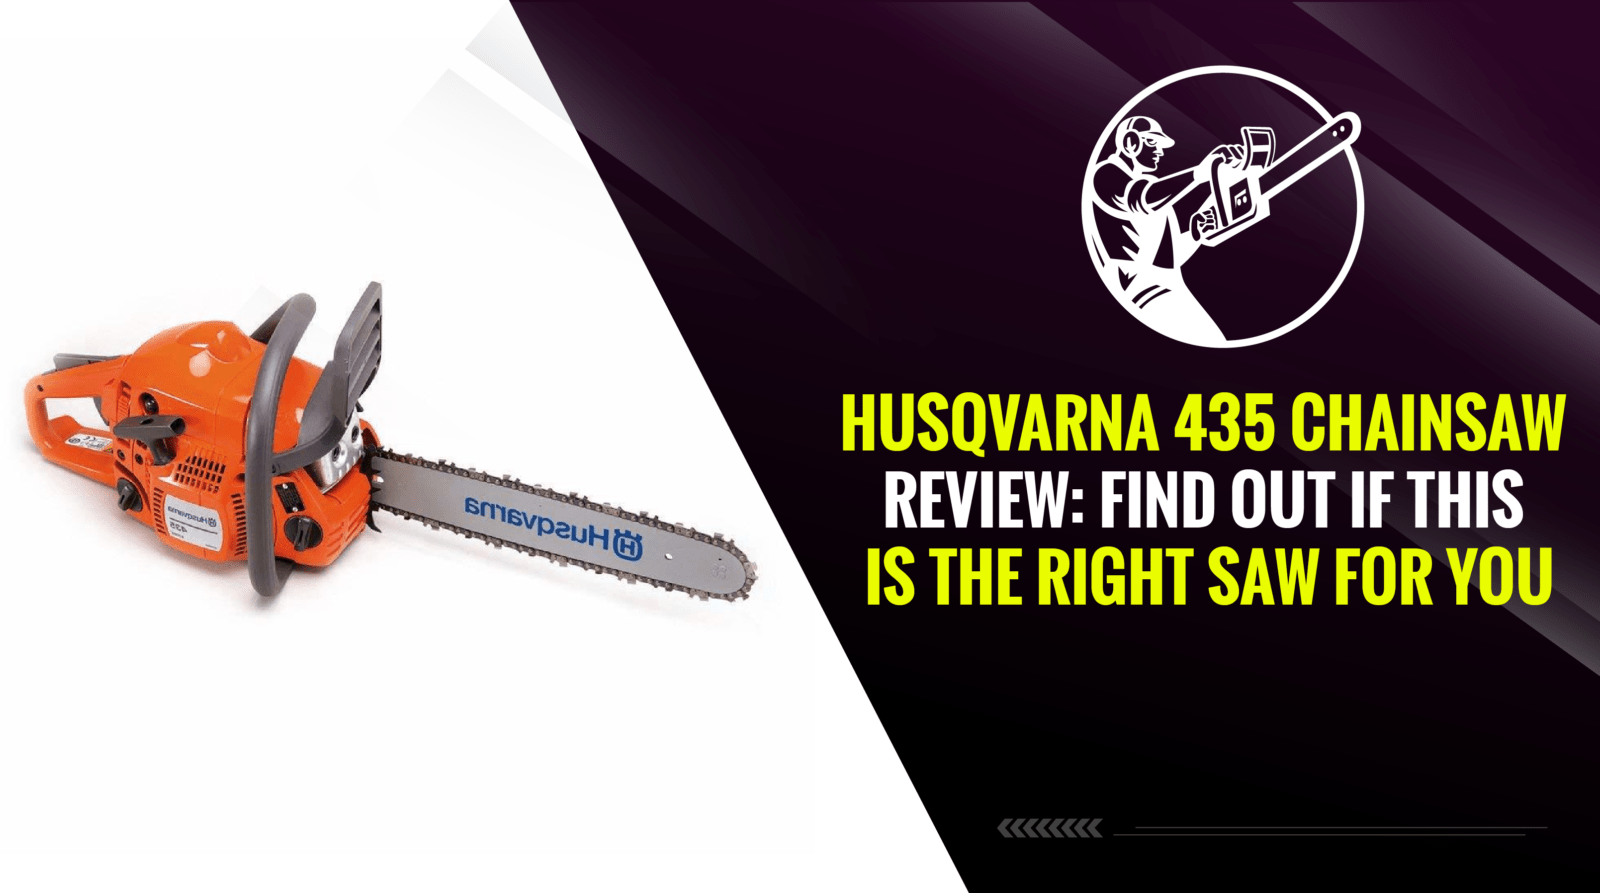 Husqvarna 435 Chainsaw Review: Find Out If This Is the Right Saw for You